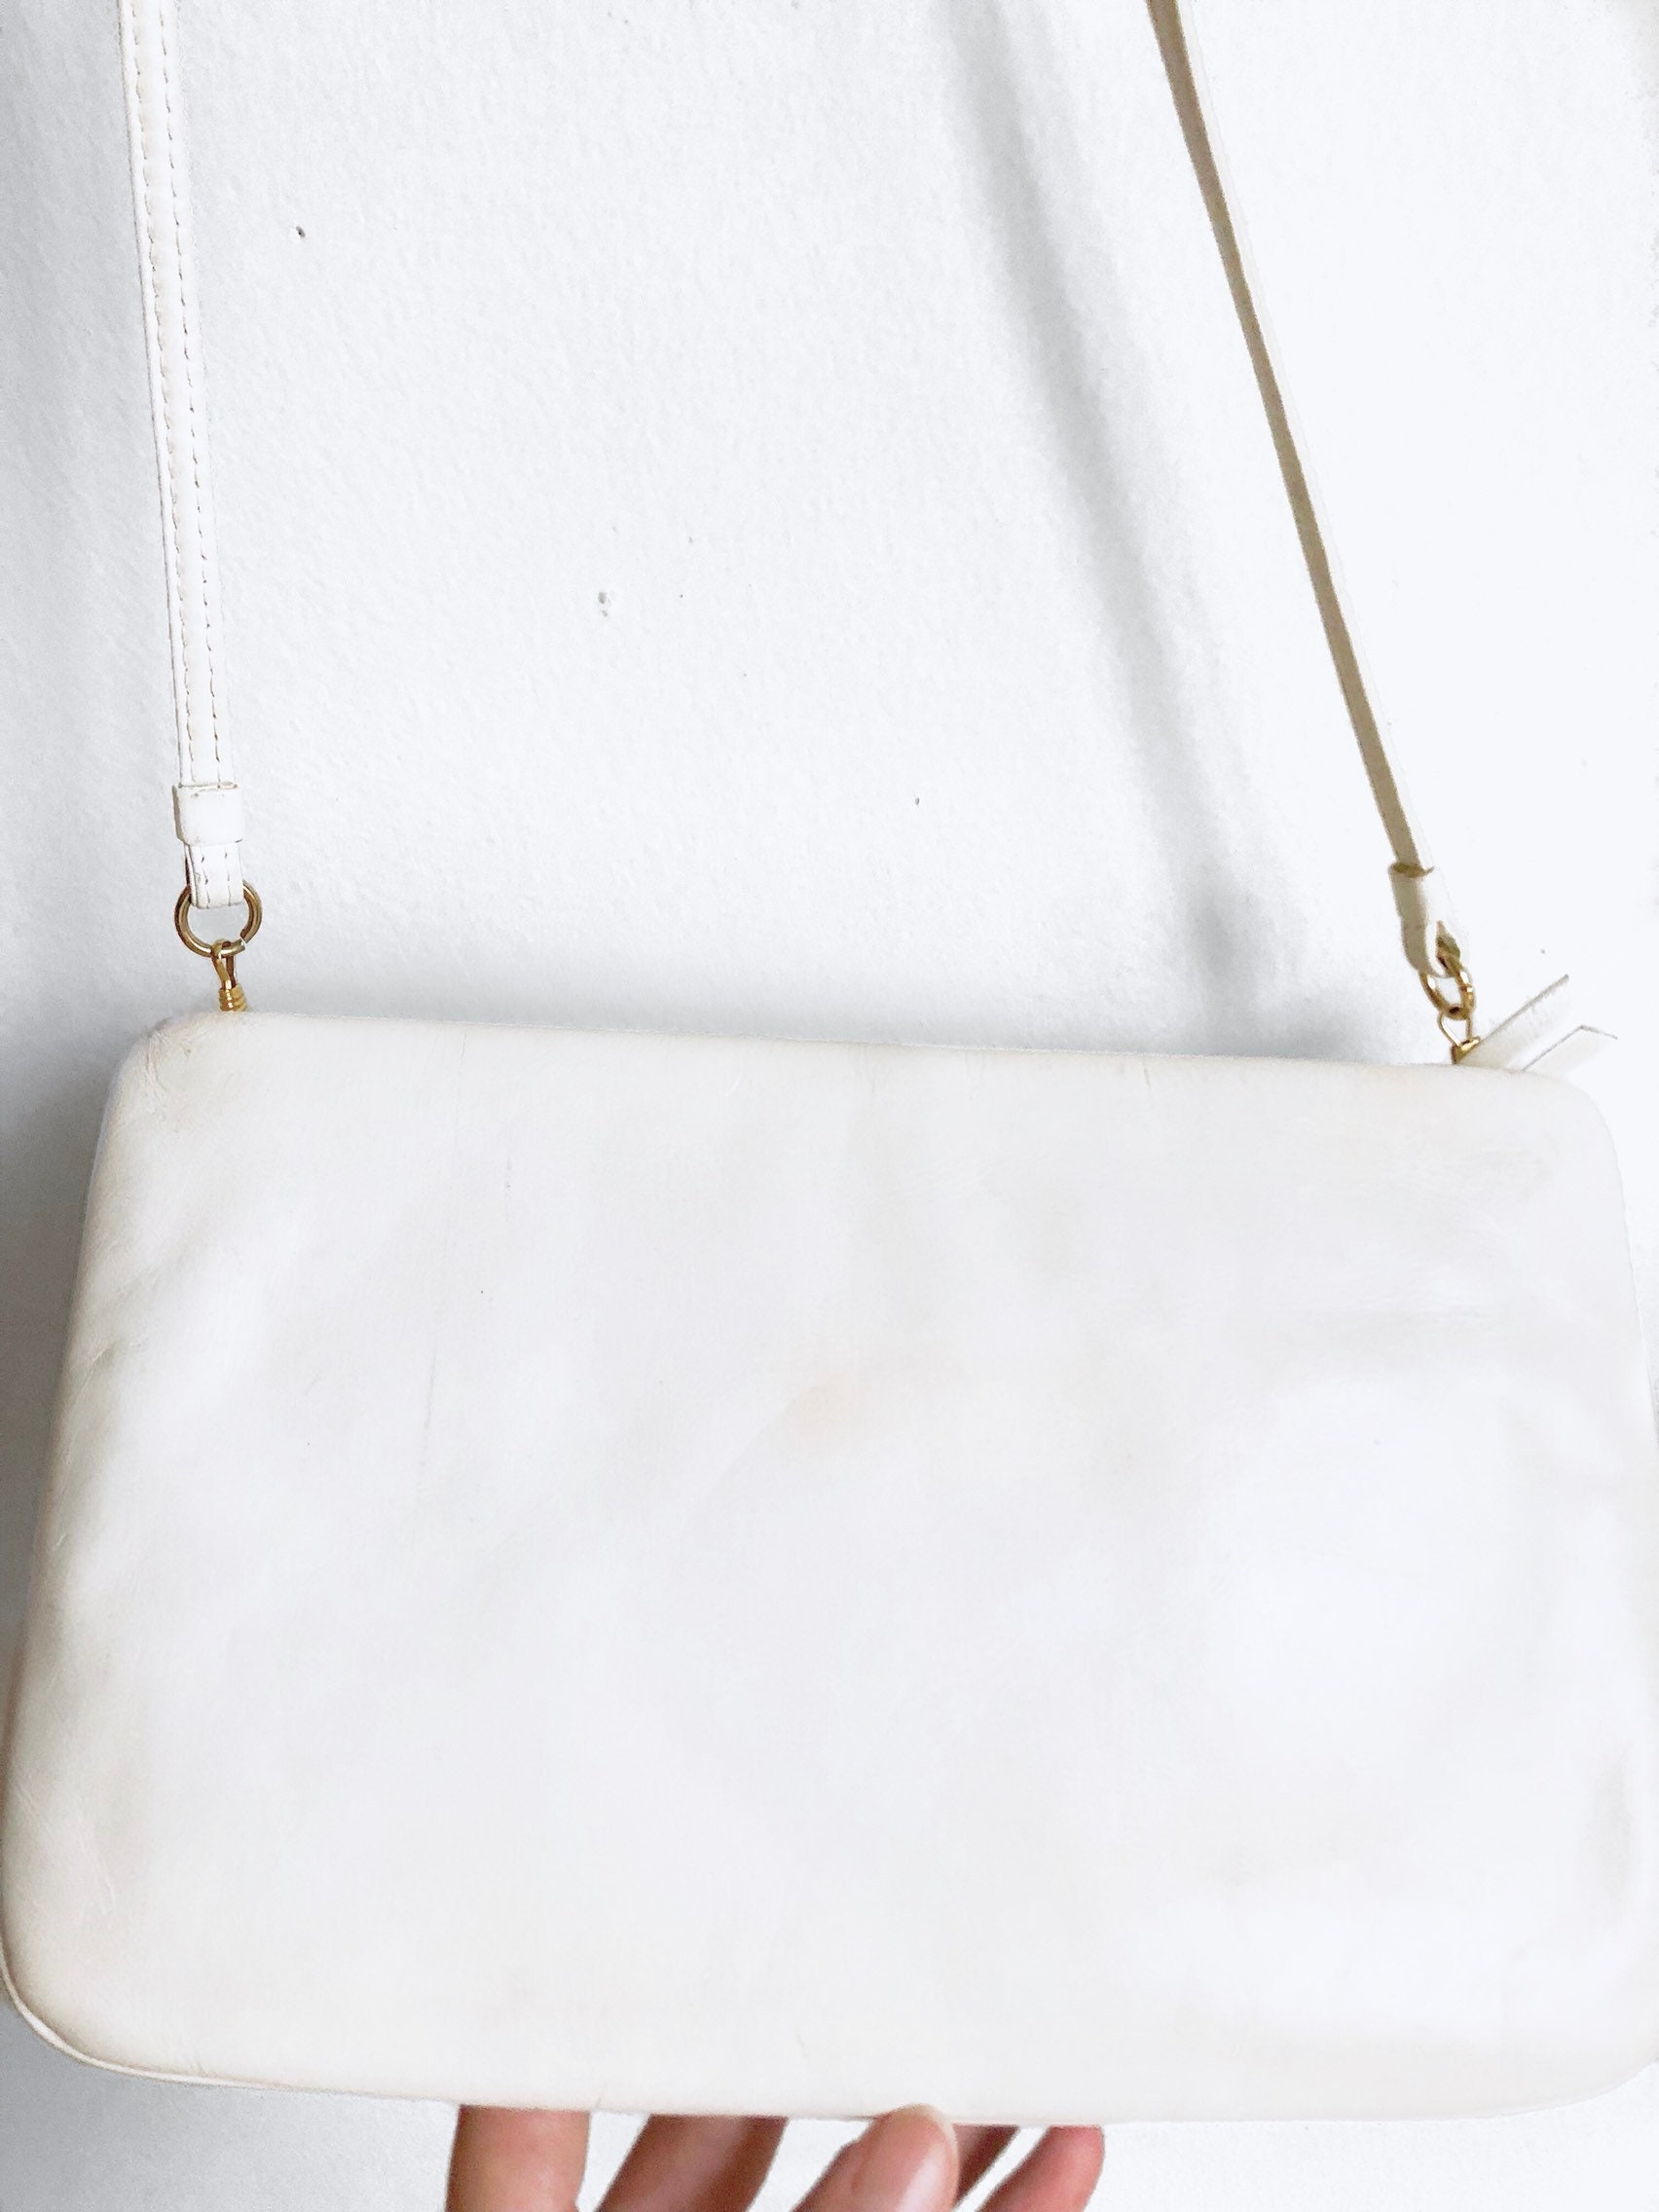 Creamy White Leather Convertible Clutch / Vintage Leather - Etsy